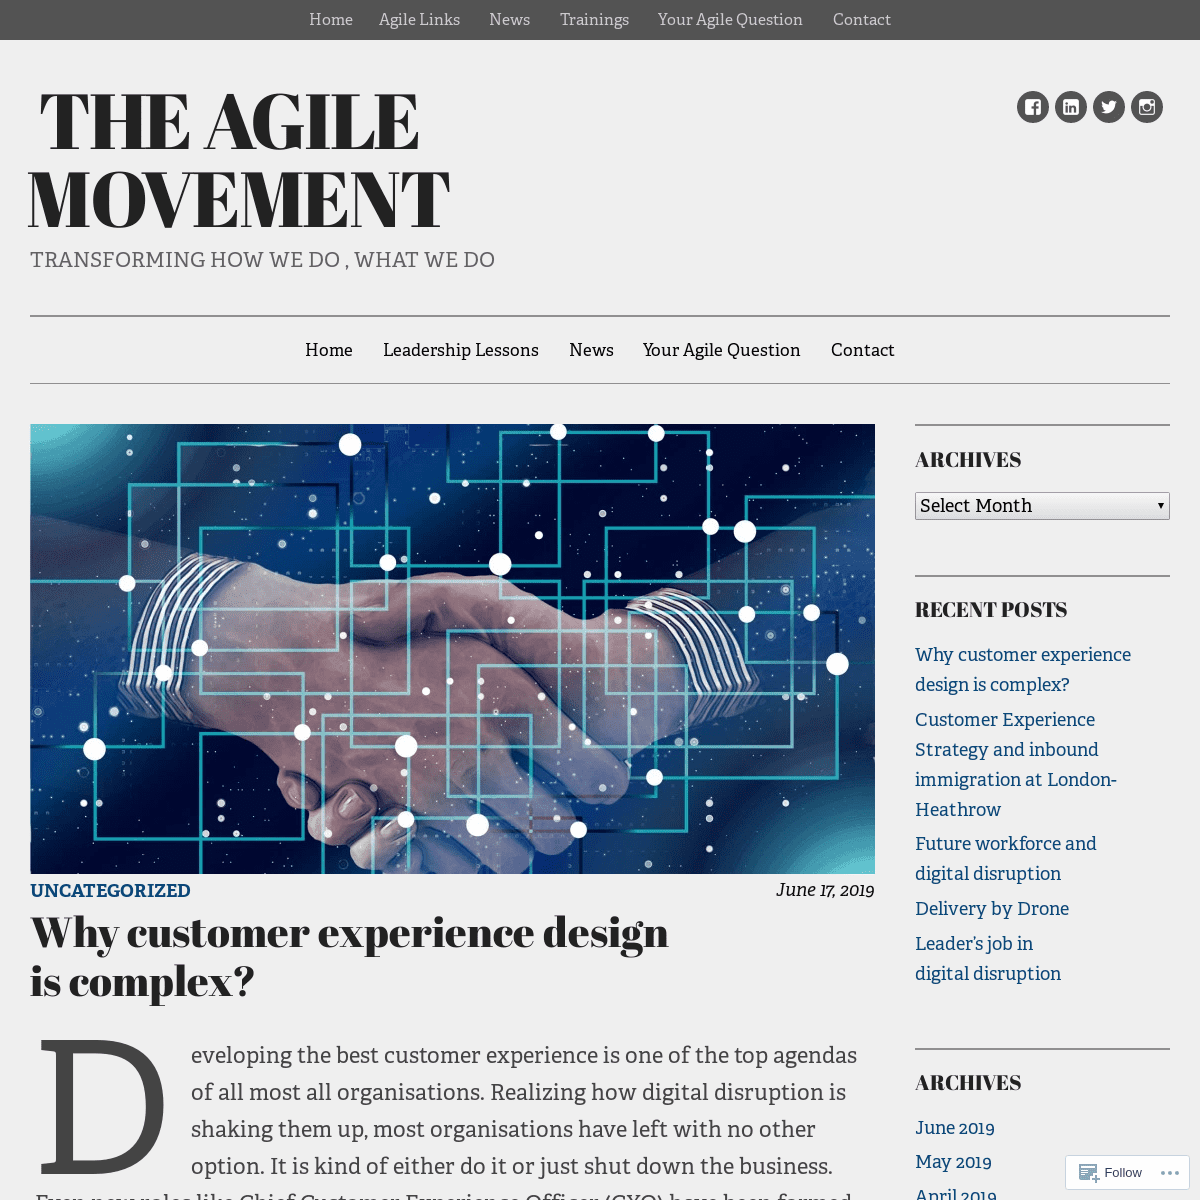 THE AGILE MOVEMENT – TRANSFORMING HOW WE DO , WHAT WE DO